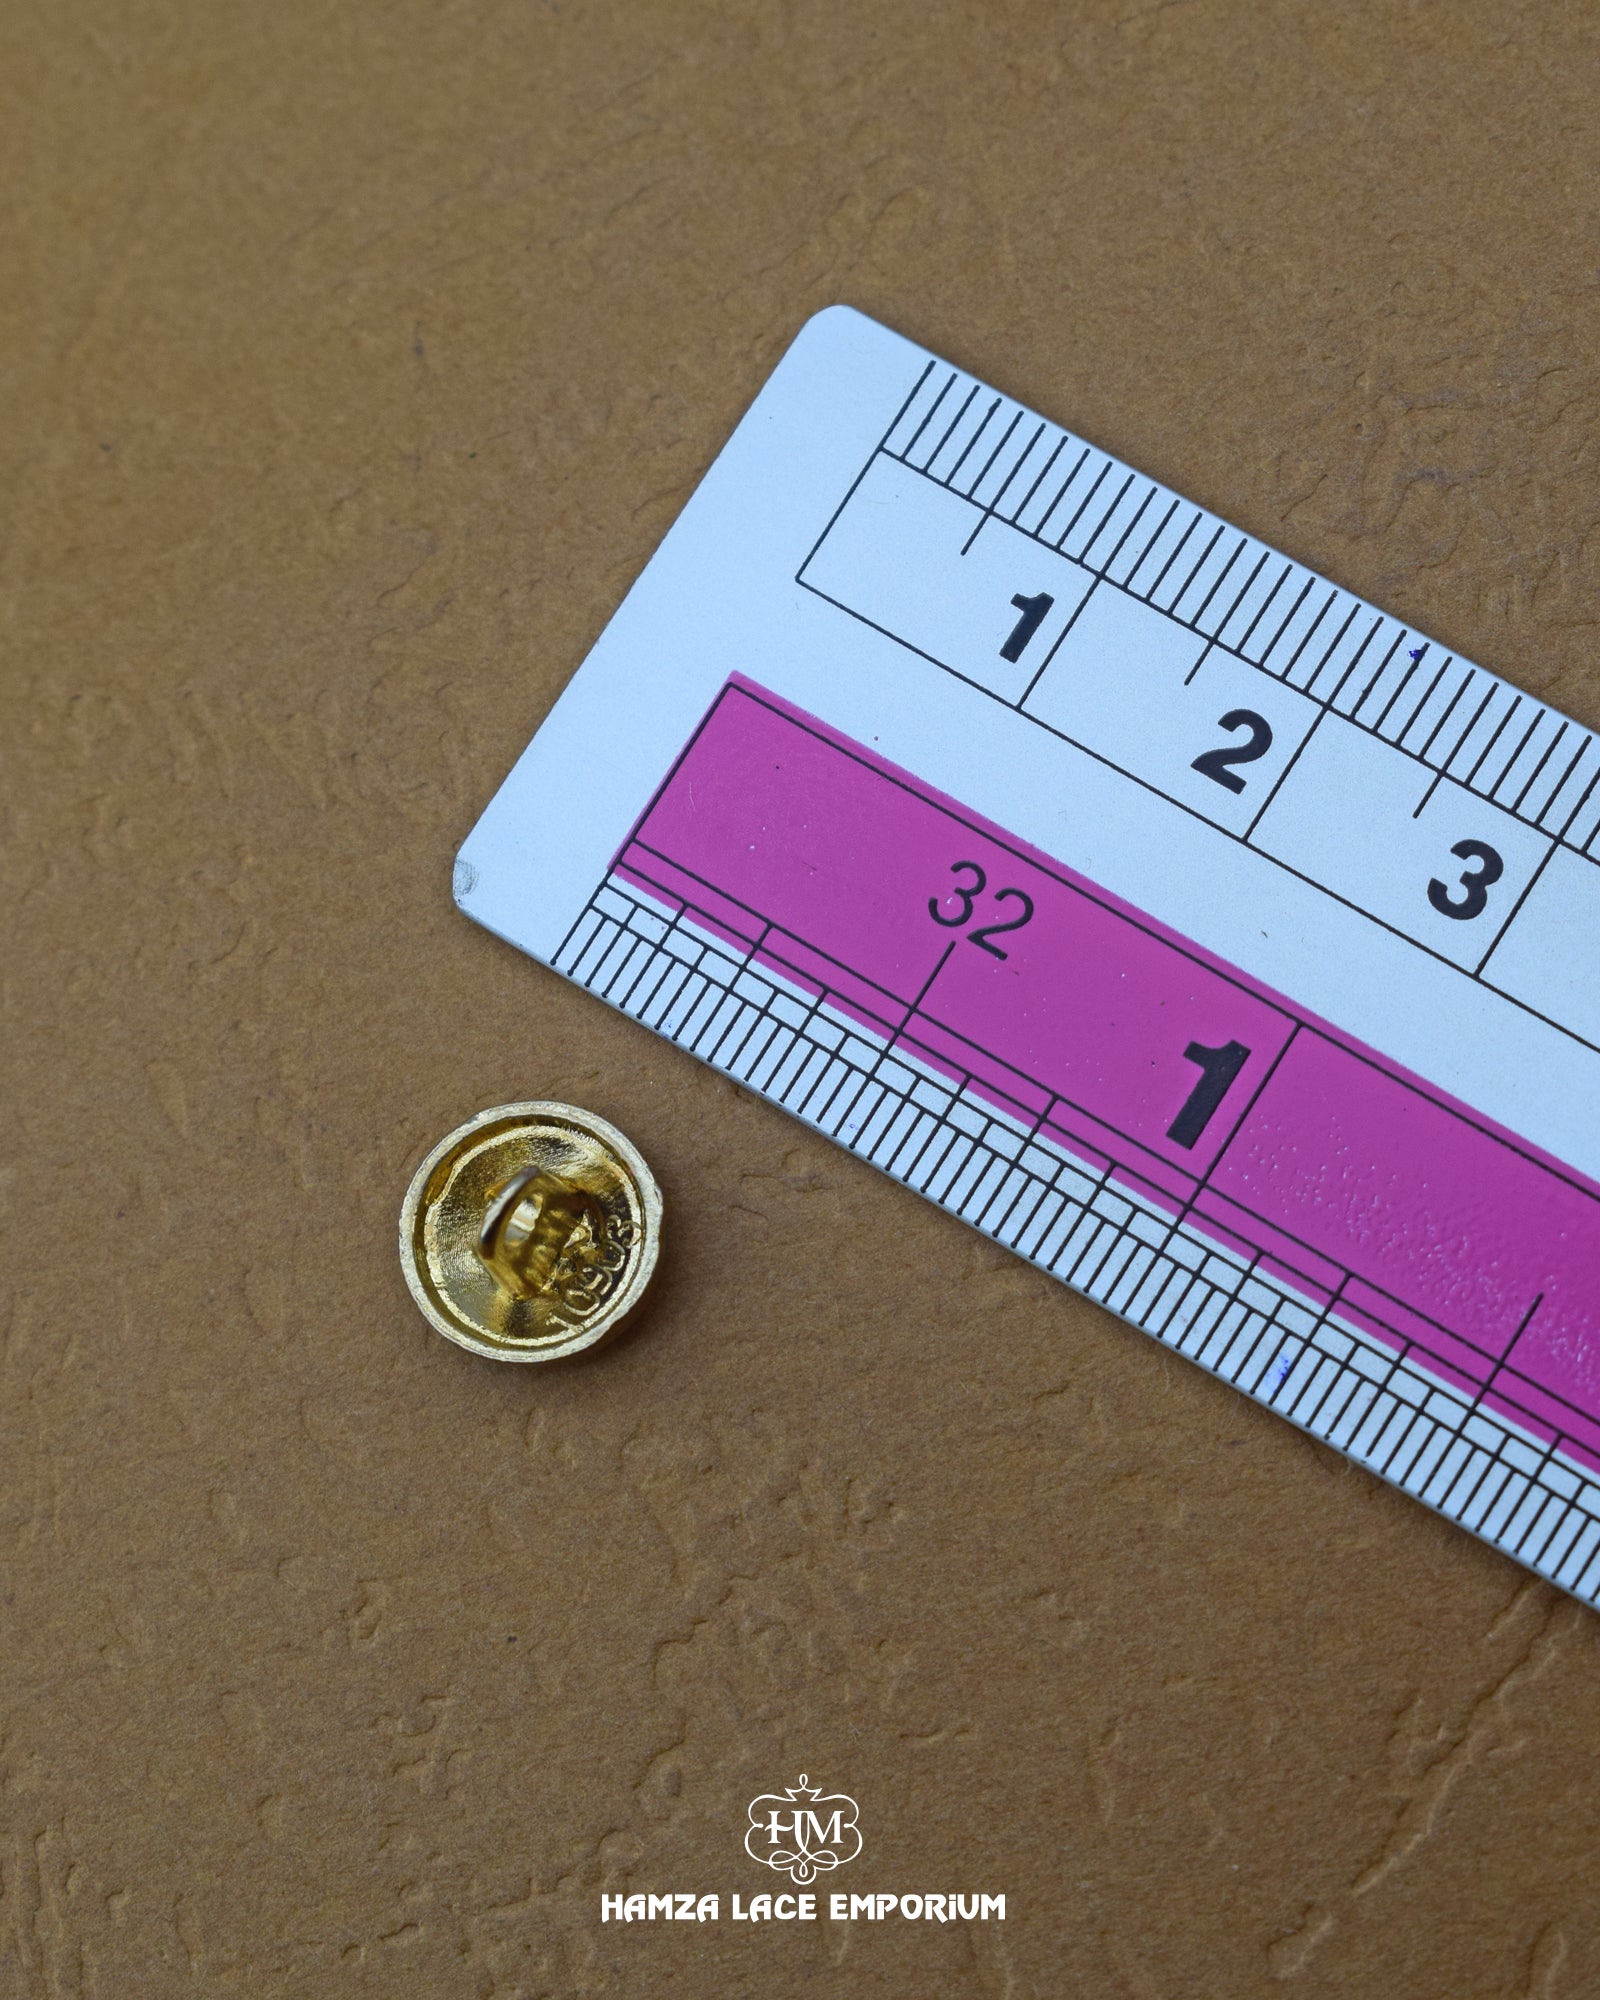 The dimensions of the 'Round Shape Button MB131' are determined using a ruler.